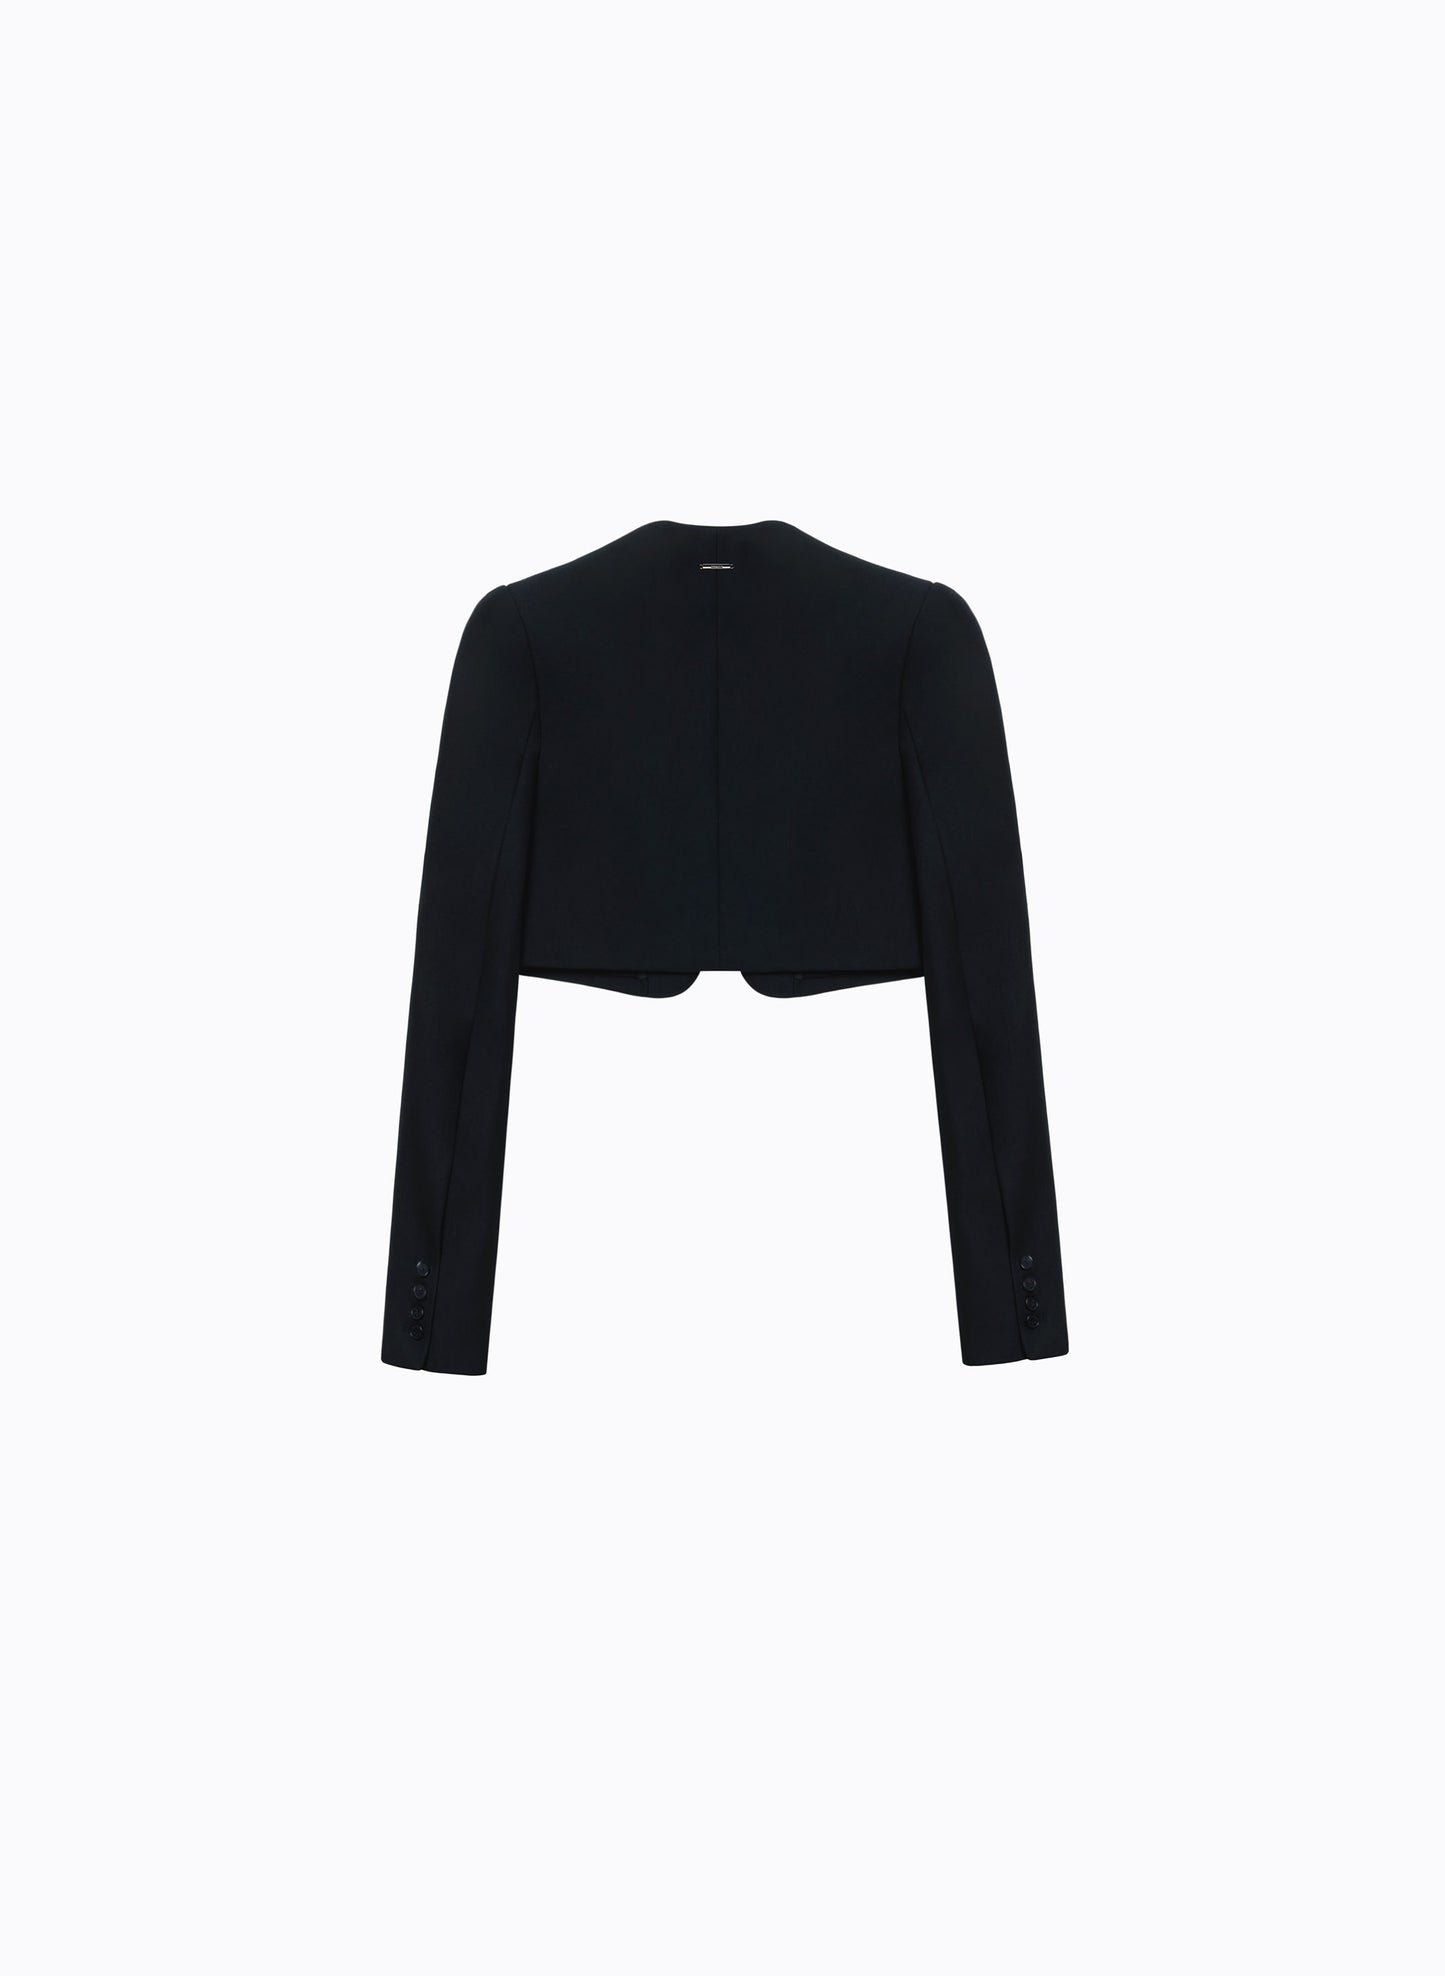 Wool Blend Fitted Loose-Fit Jacket in Black